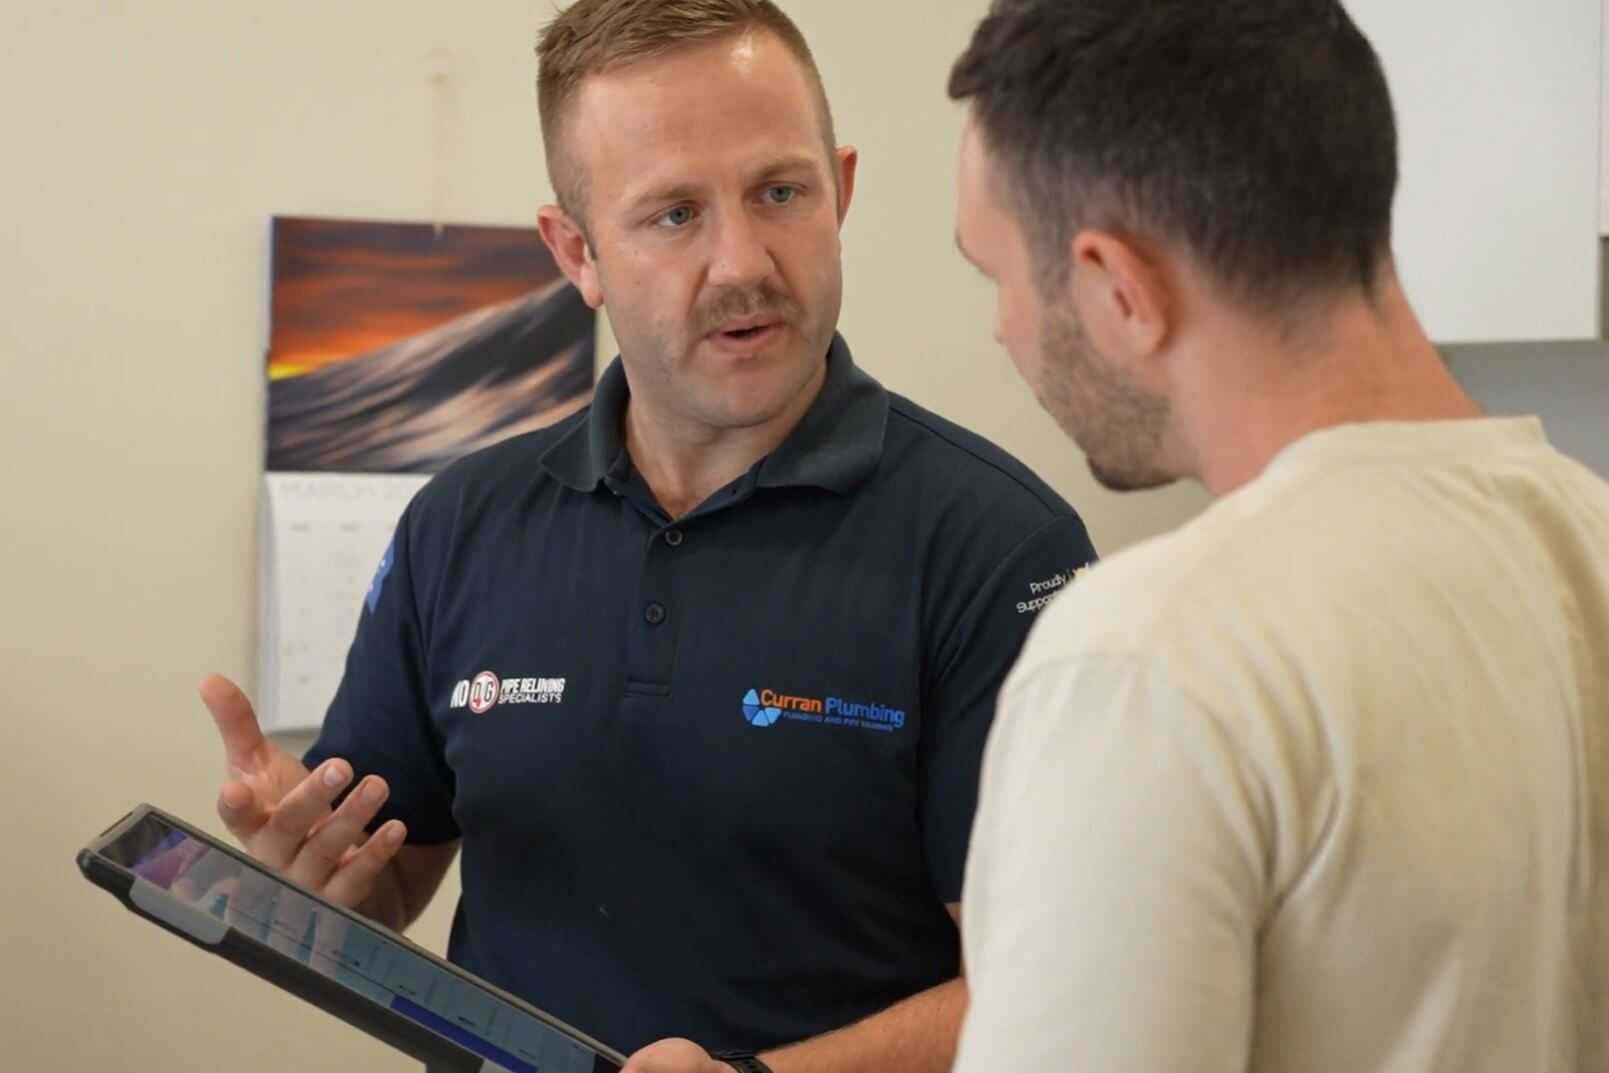 Plumber wearing navy top showing quote on tablet to client